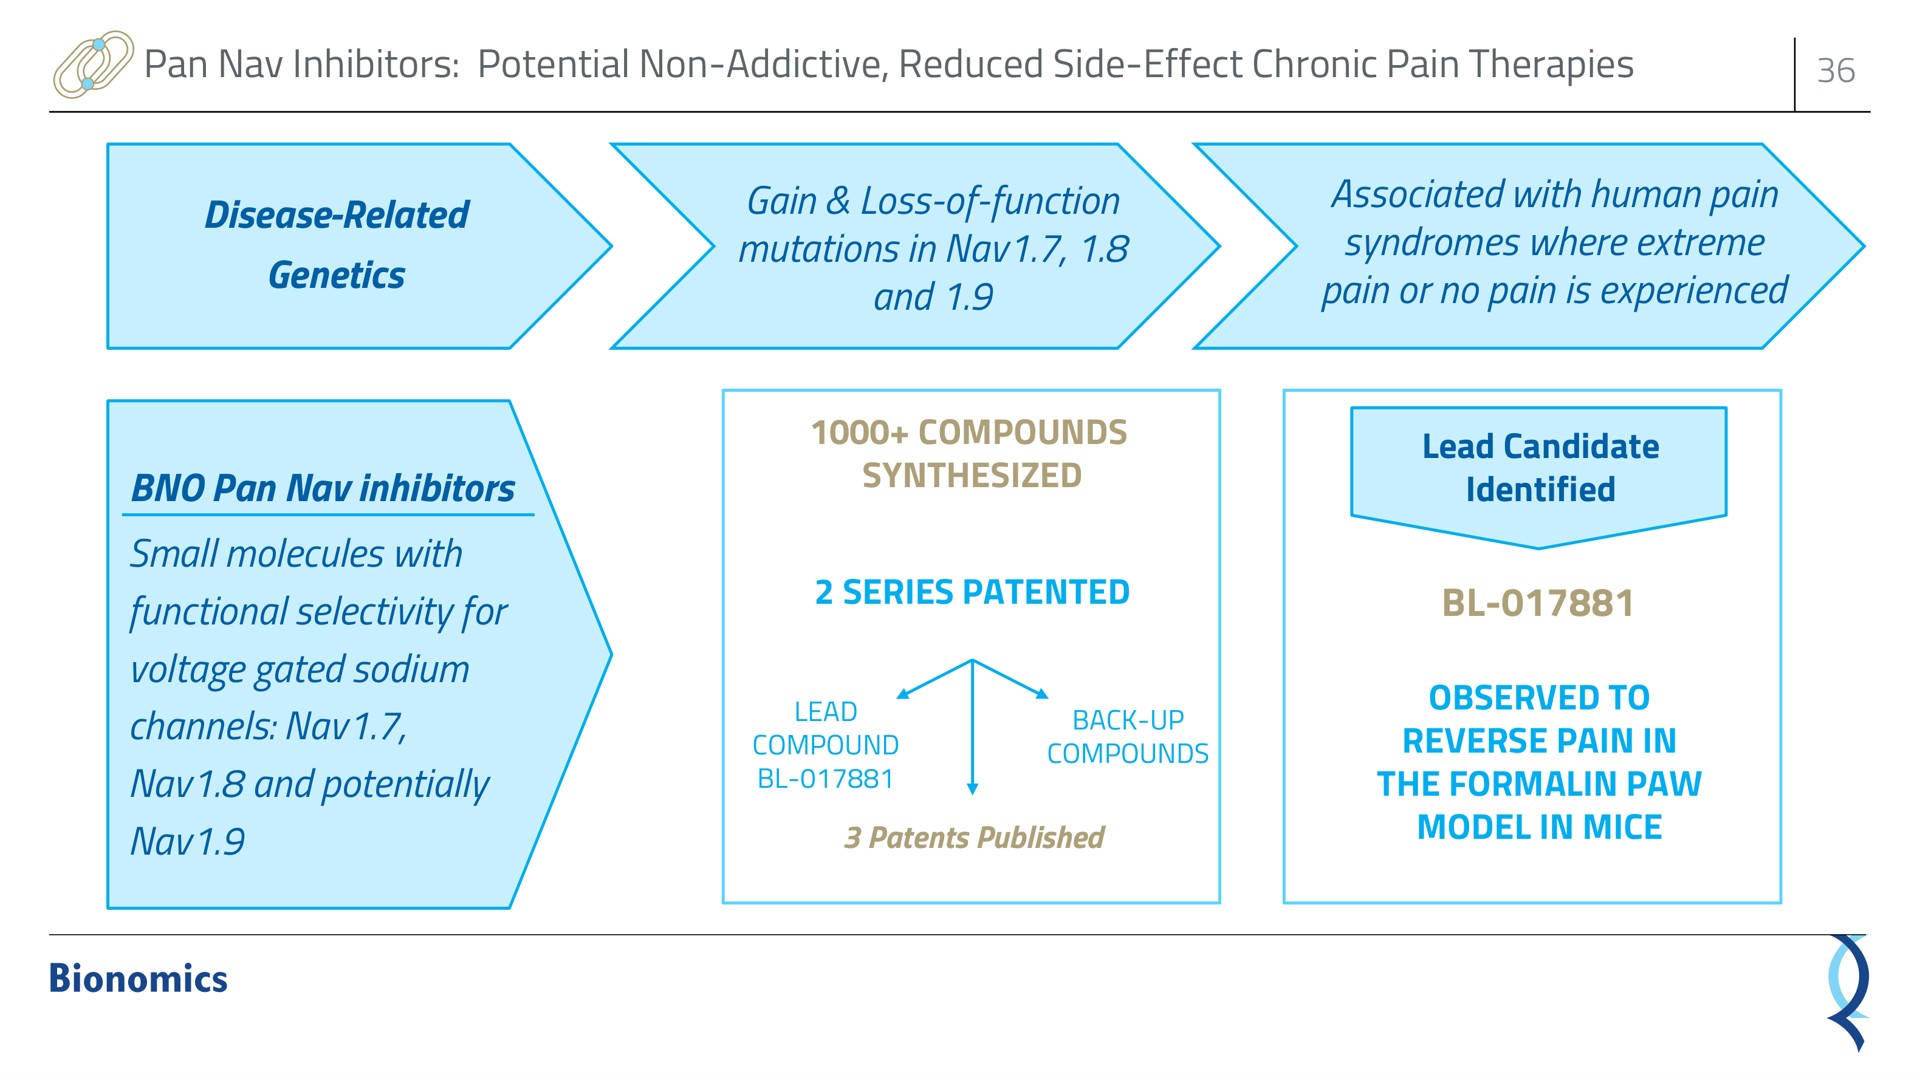 pan inhibitors potential non reduced side effect chronic pain therapies disease related genetics gain loss of function mutations in and associated with human pain syndromes where extreme pain or no pain is experienced pan inhibitors small molecules with functional selectivity for voltage gated sodium channels and potentially compounds synthesized series patented lead candidate identified observed to reverse pain in the paw model in mice back up | Bionomics